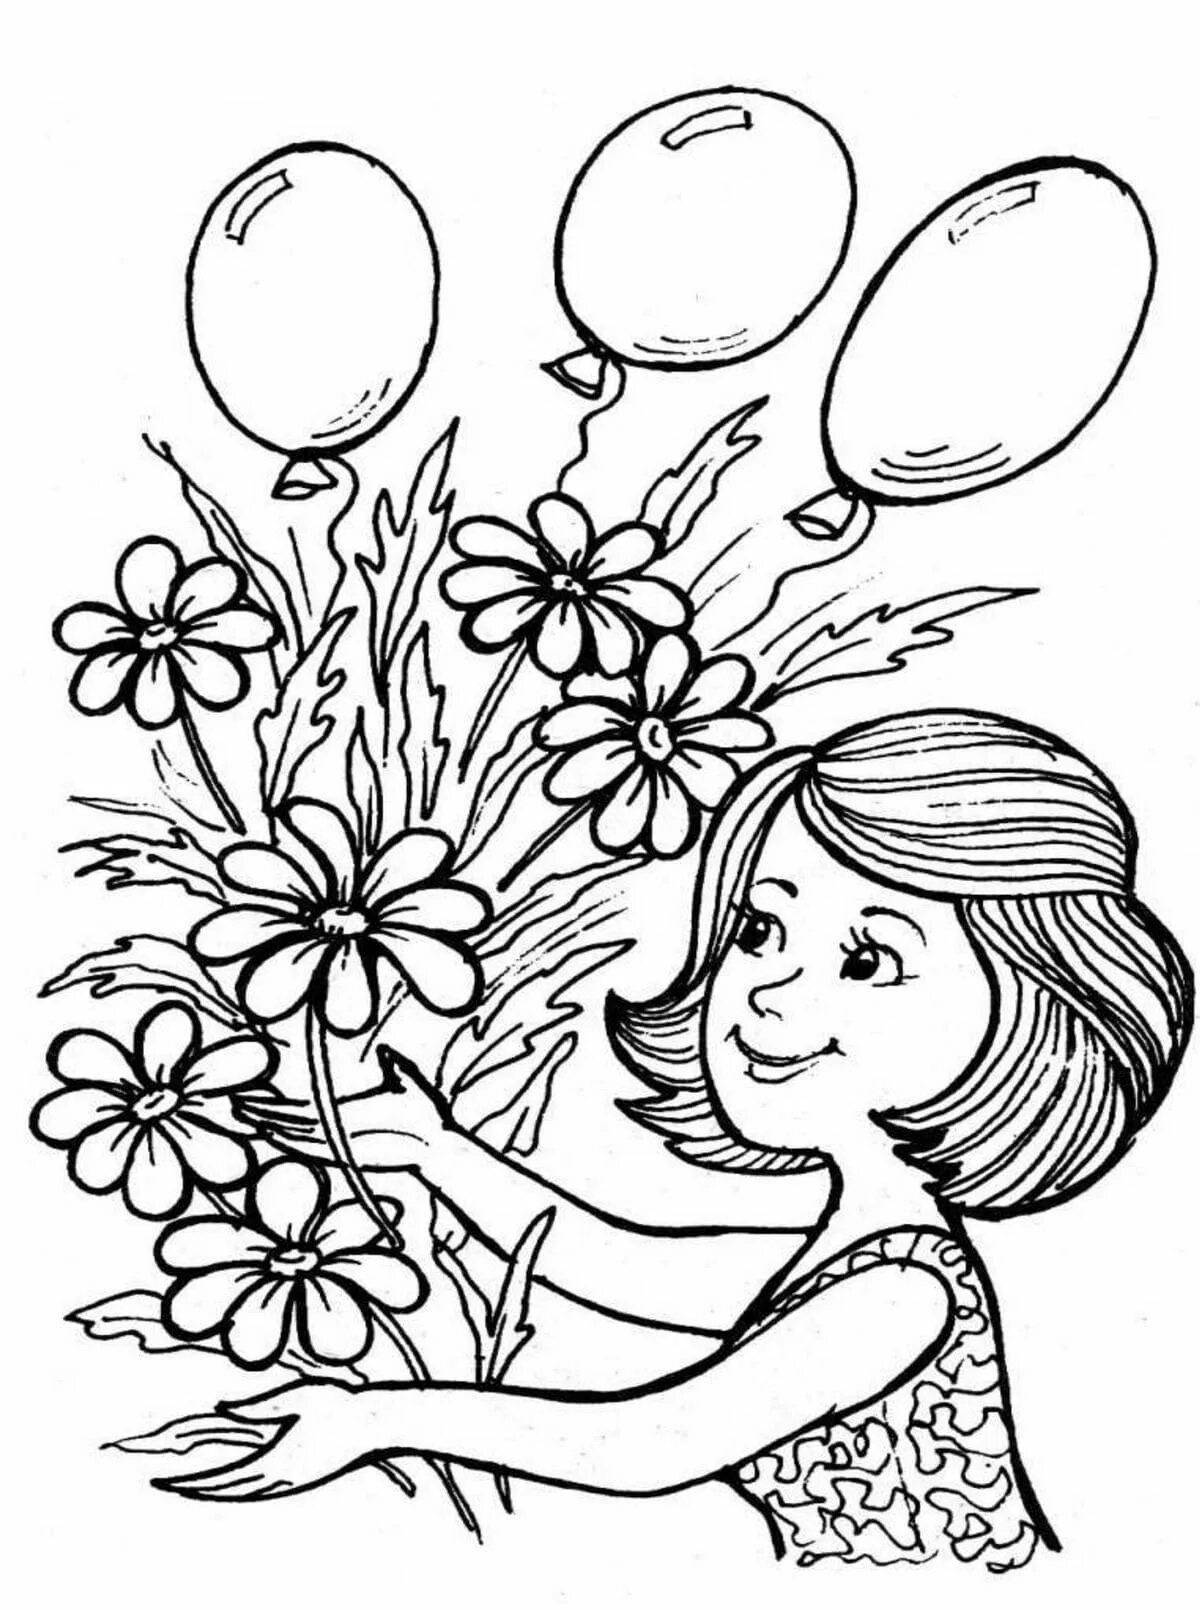 Merry 8 March coloring book